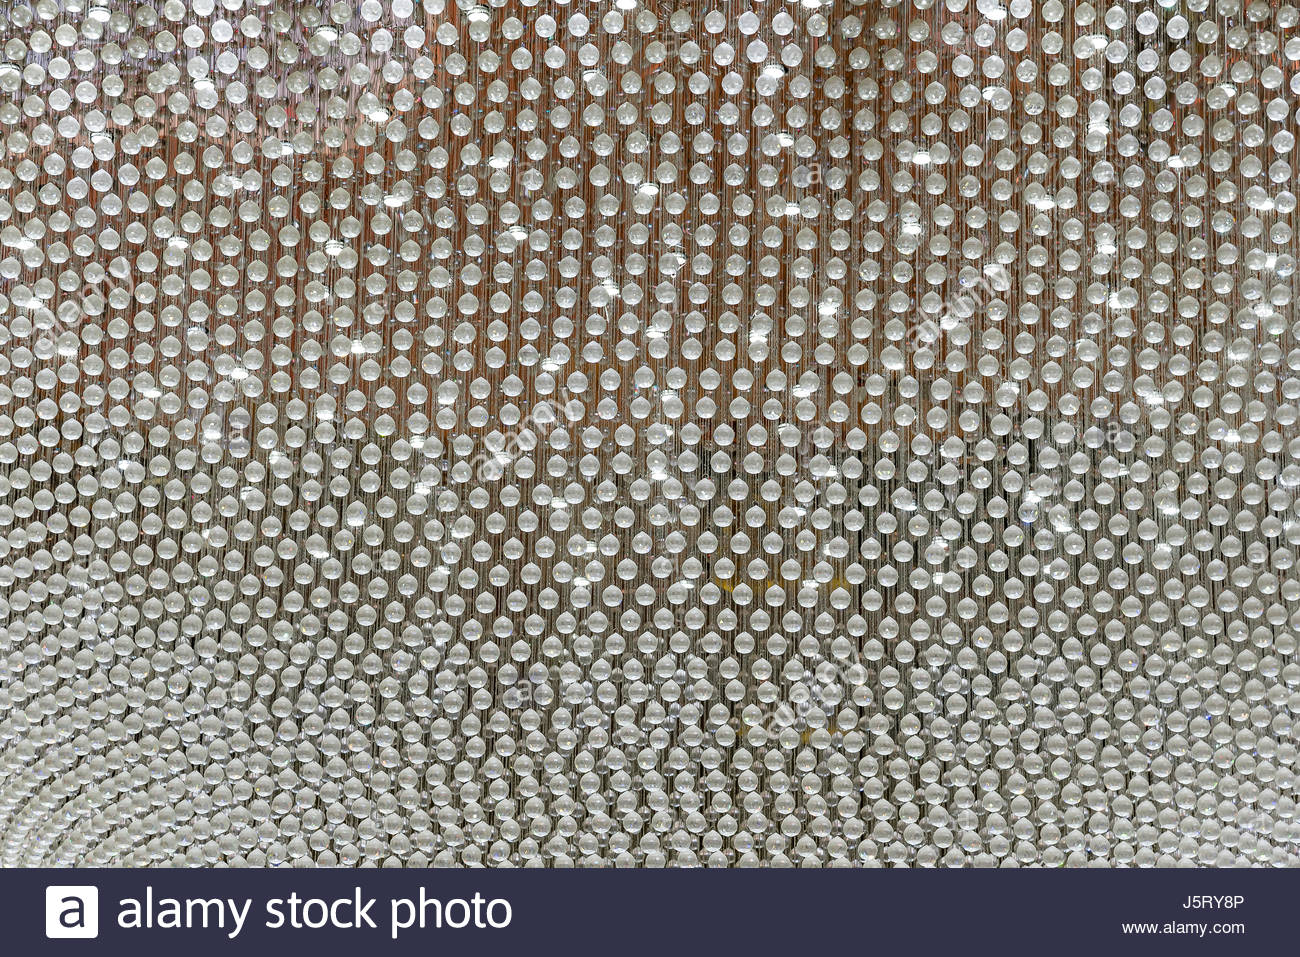 Abstract Crystal Chandelier Background Of Balls